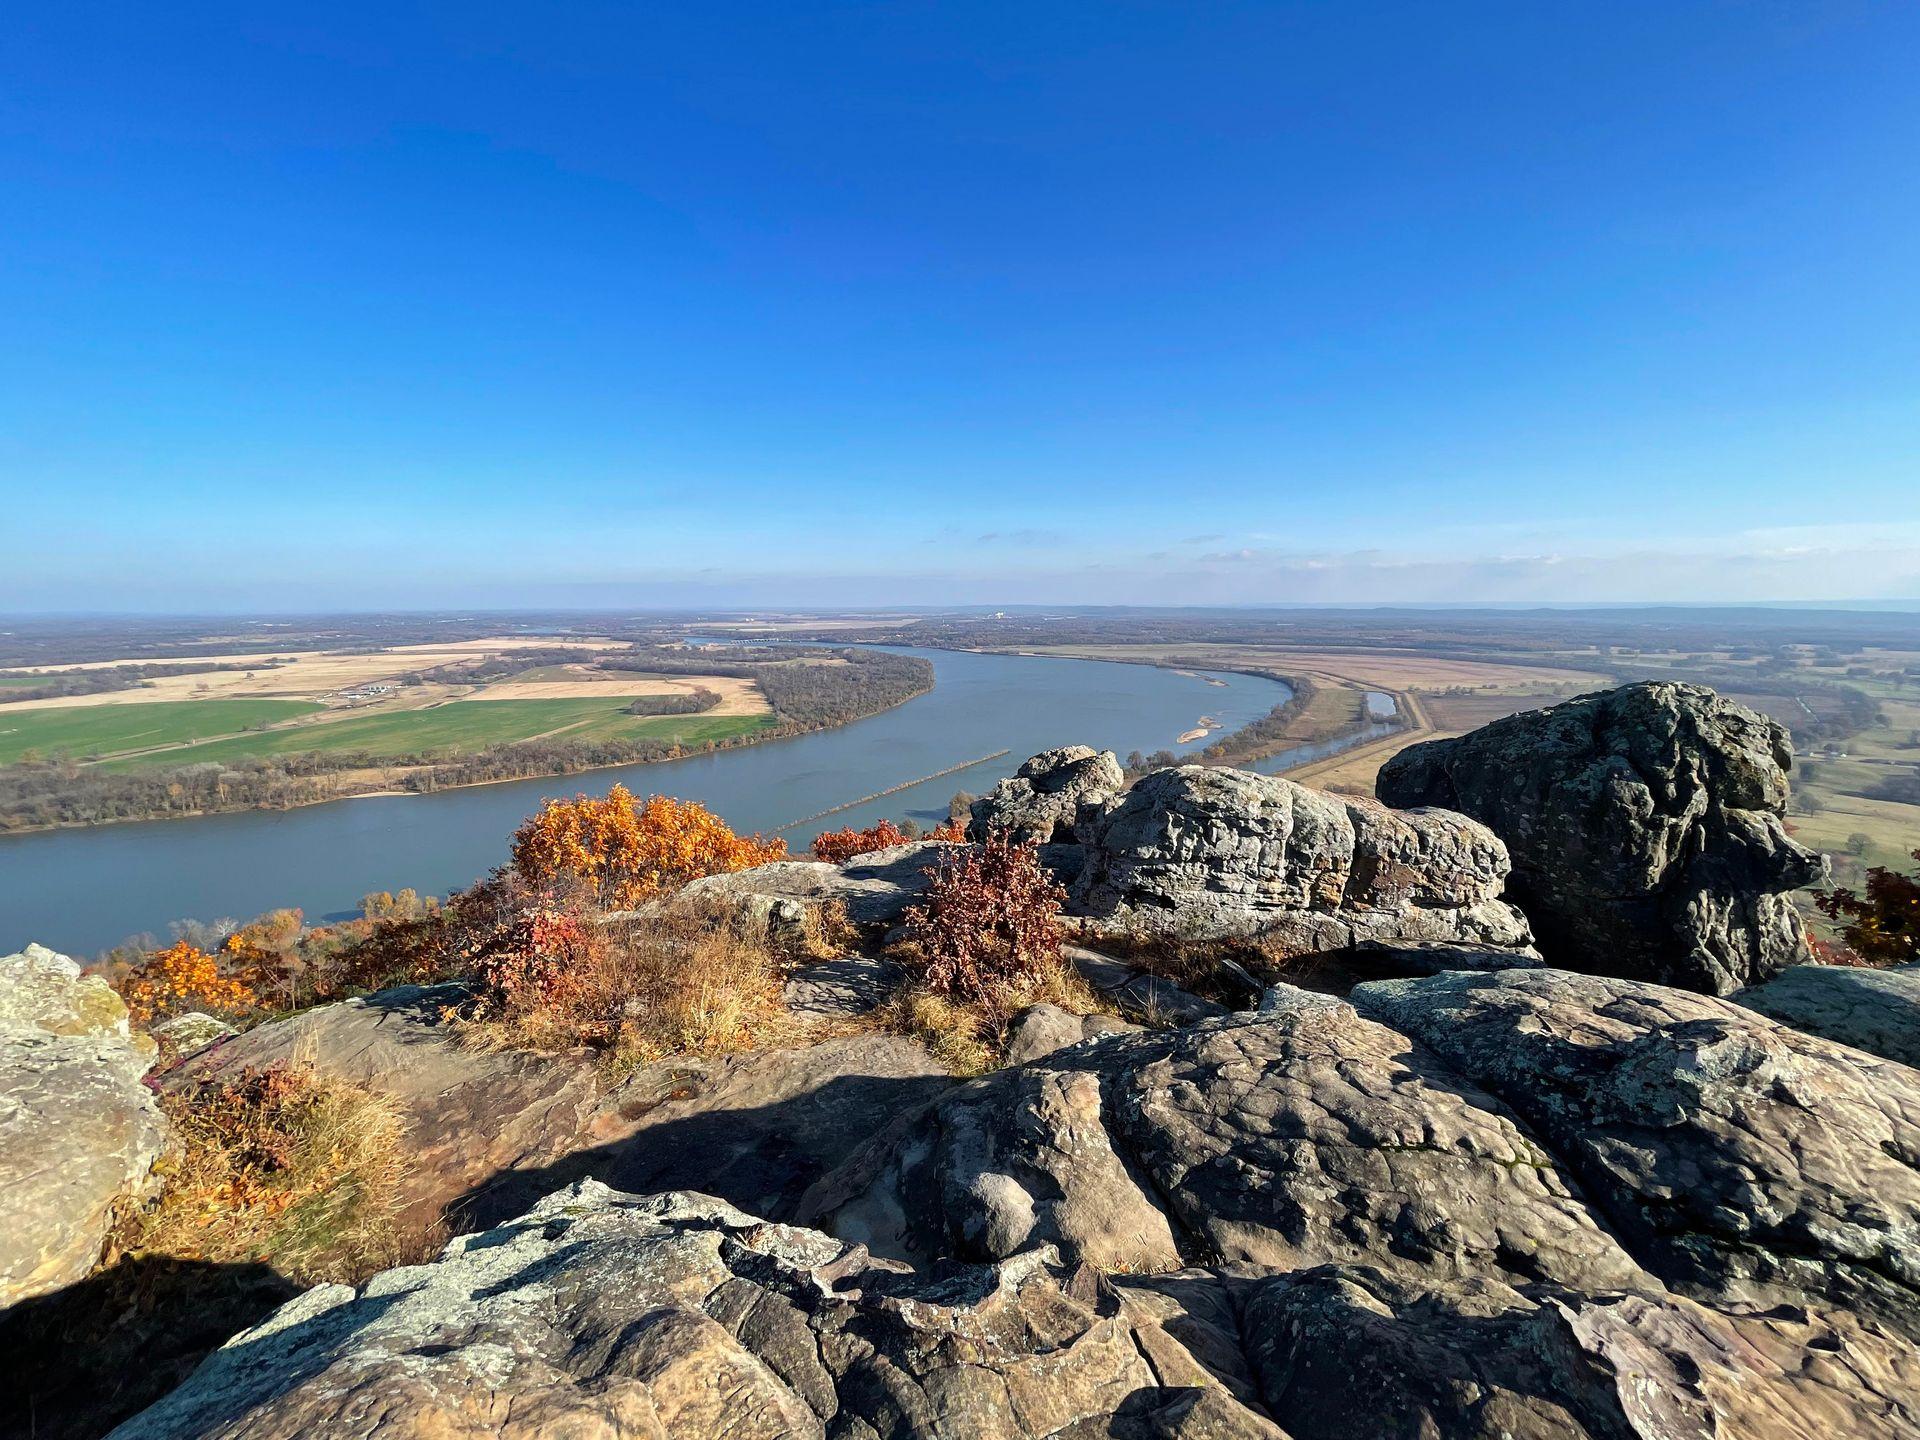 An area with boulders with a view of a curve in the Arkansas River down below.